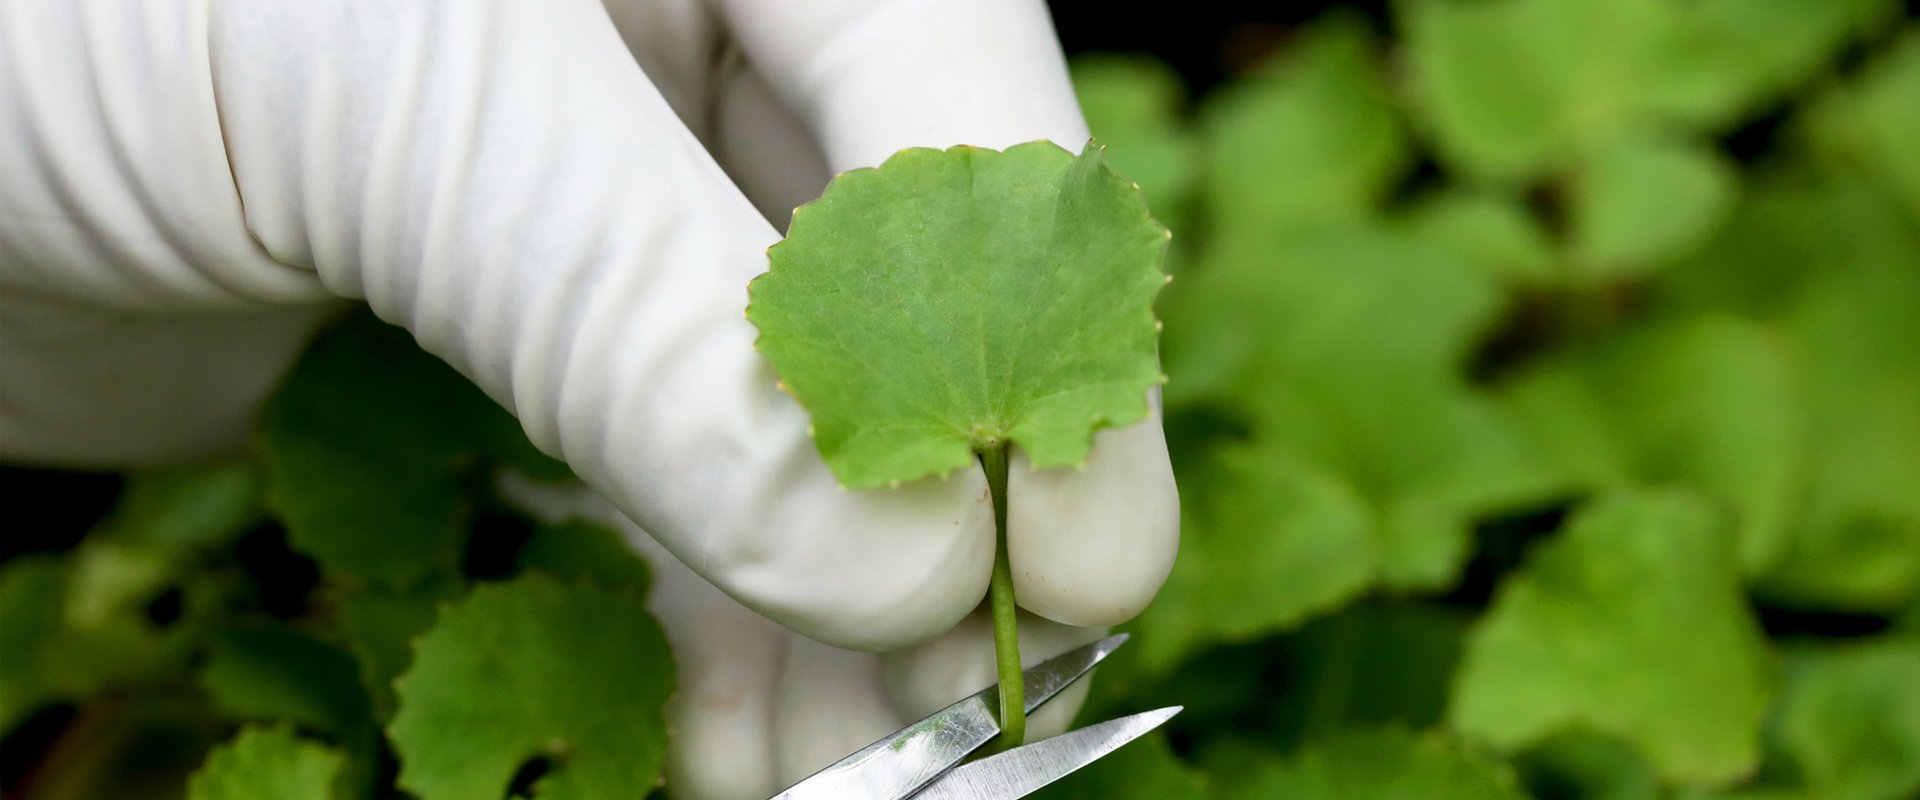 The Centella Asiatica, a Plant that Cares for the Skin and Communities